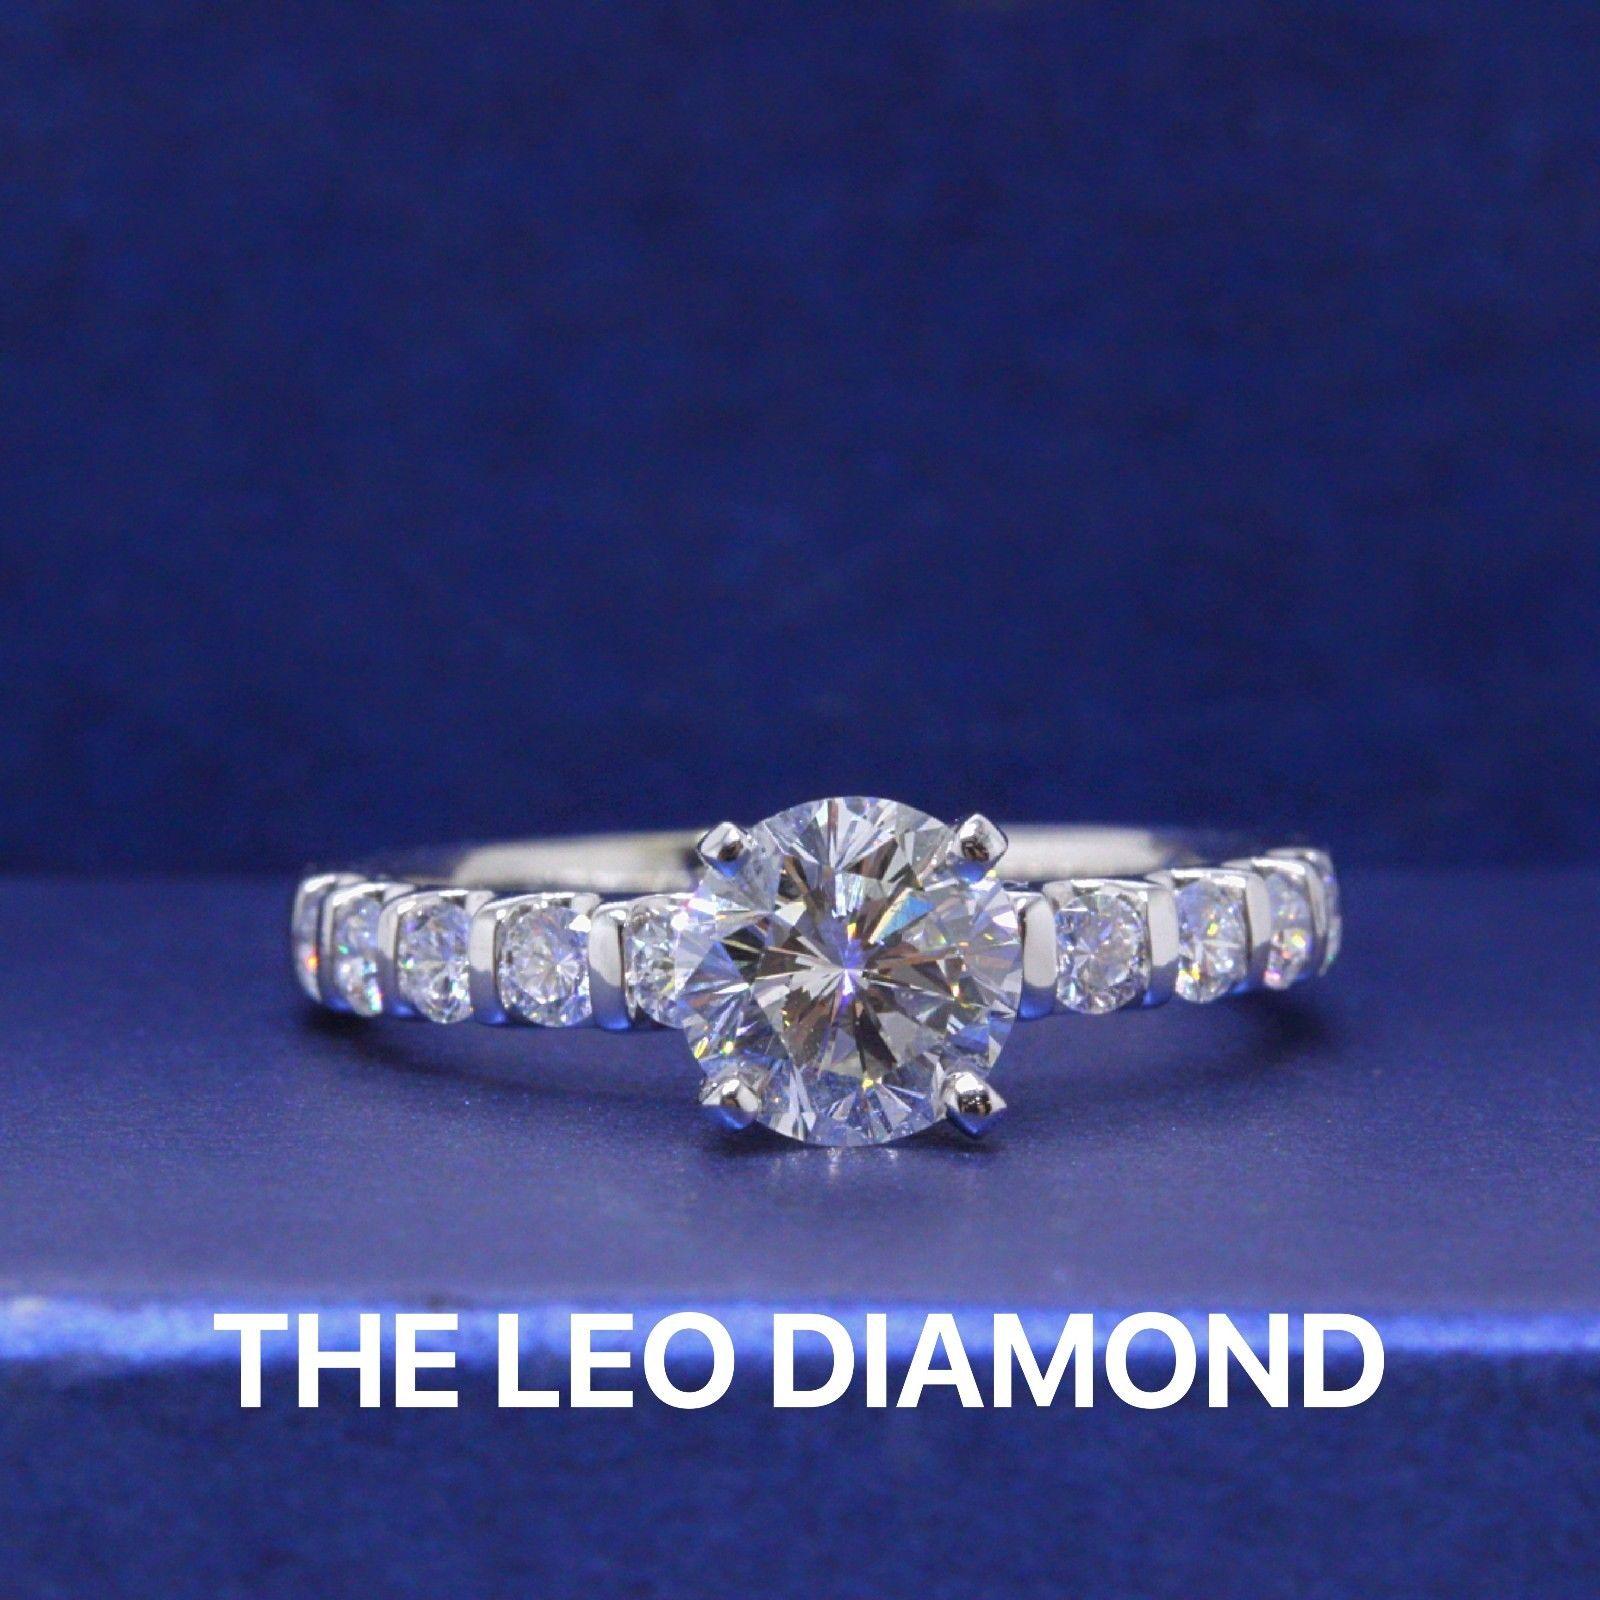 THE LEO DIAMOND 
Style:  LEO Solitaire with Diamond Band Design
Serial Number:  LEO 005576 Diamond - LEO 5061515 Setting
Certificate:  IGI # 32671691 & GSI # 4984000101
Metal: 14KT White Gold 
Size:  7.5 - Sizable
Total Carat Weight:  1.70